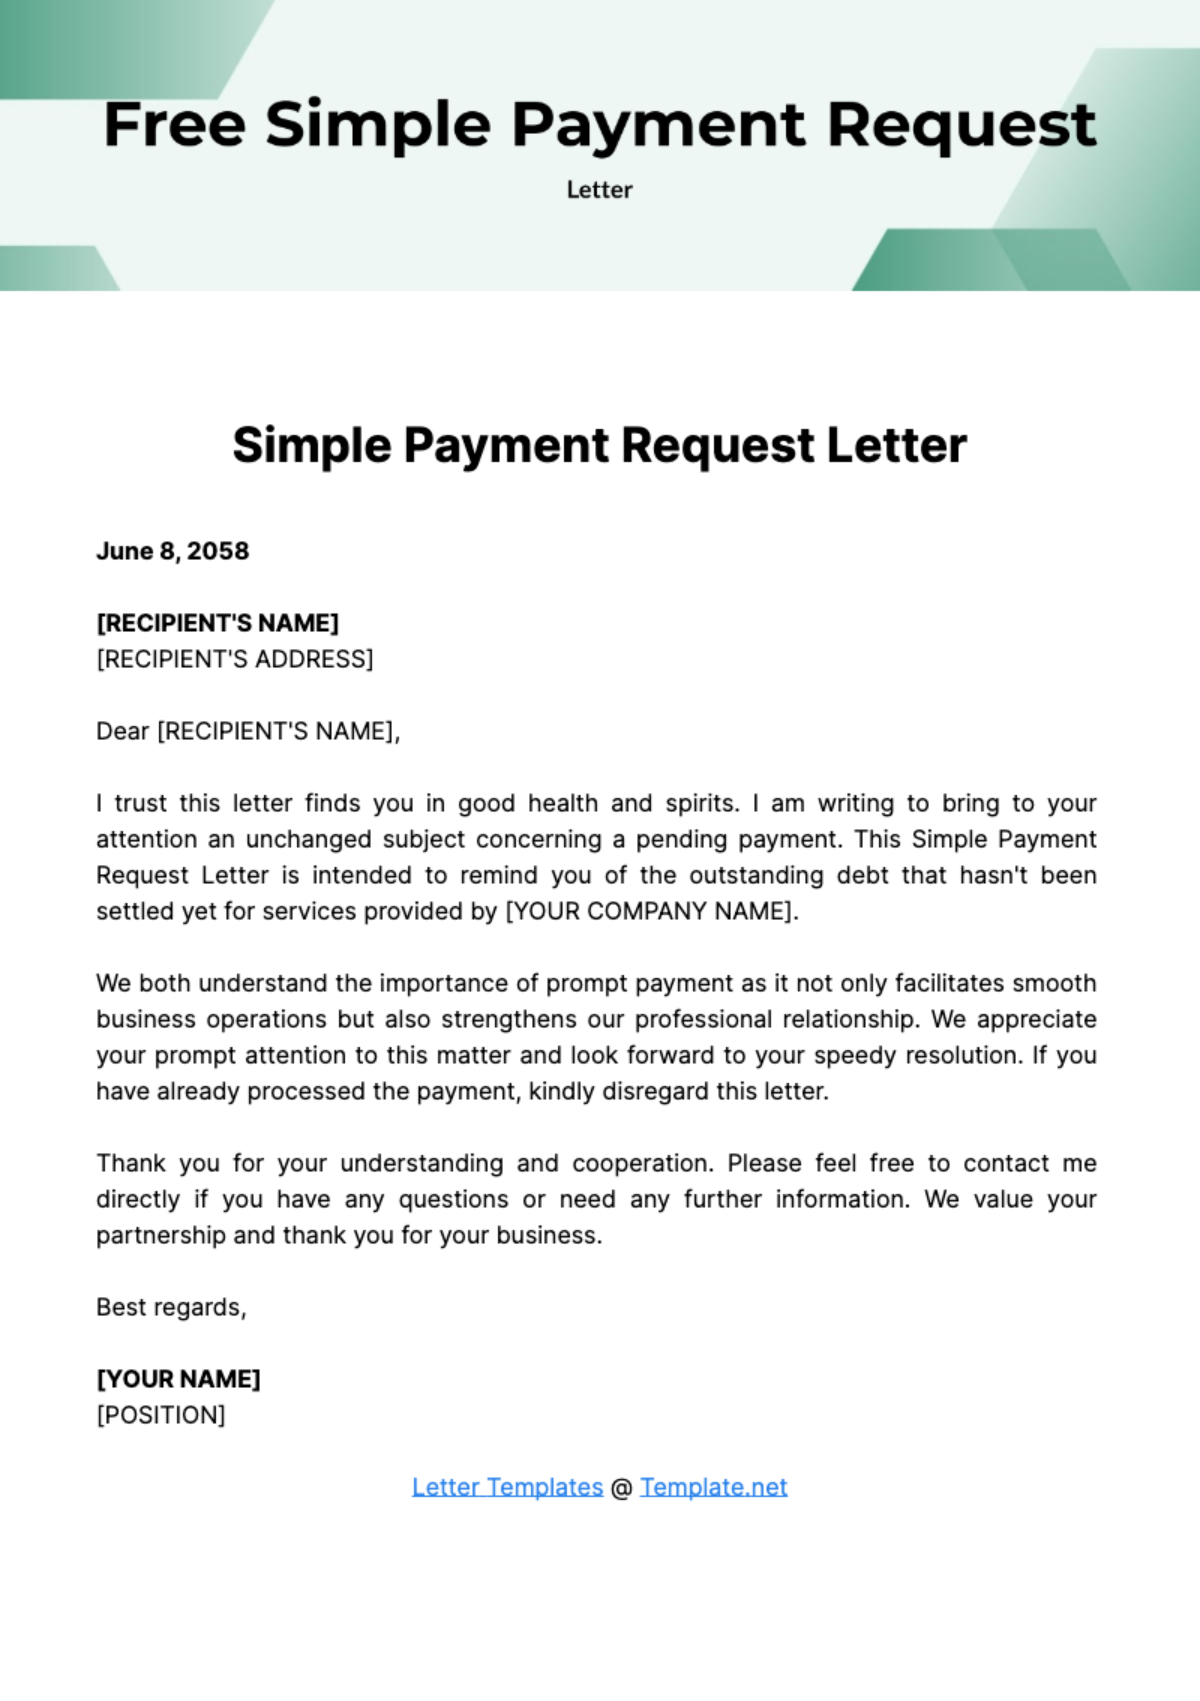 Free Simple Payment Request Letter Template